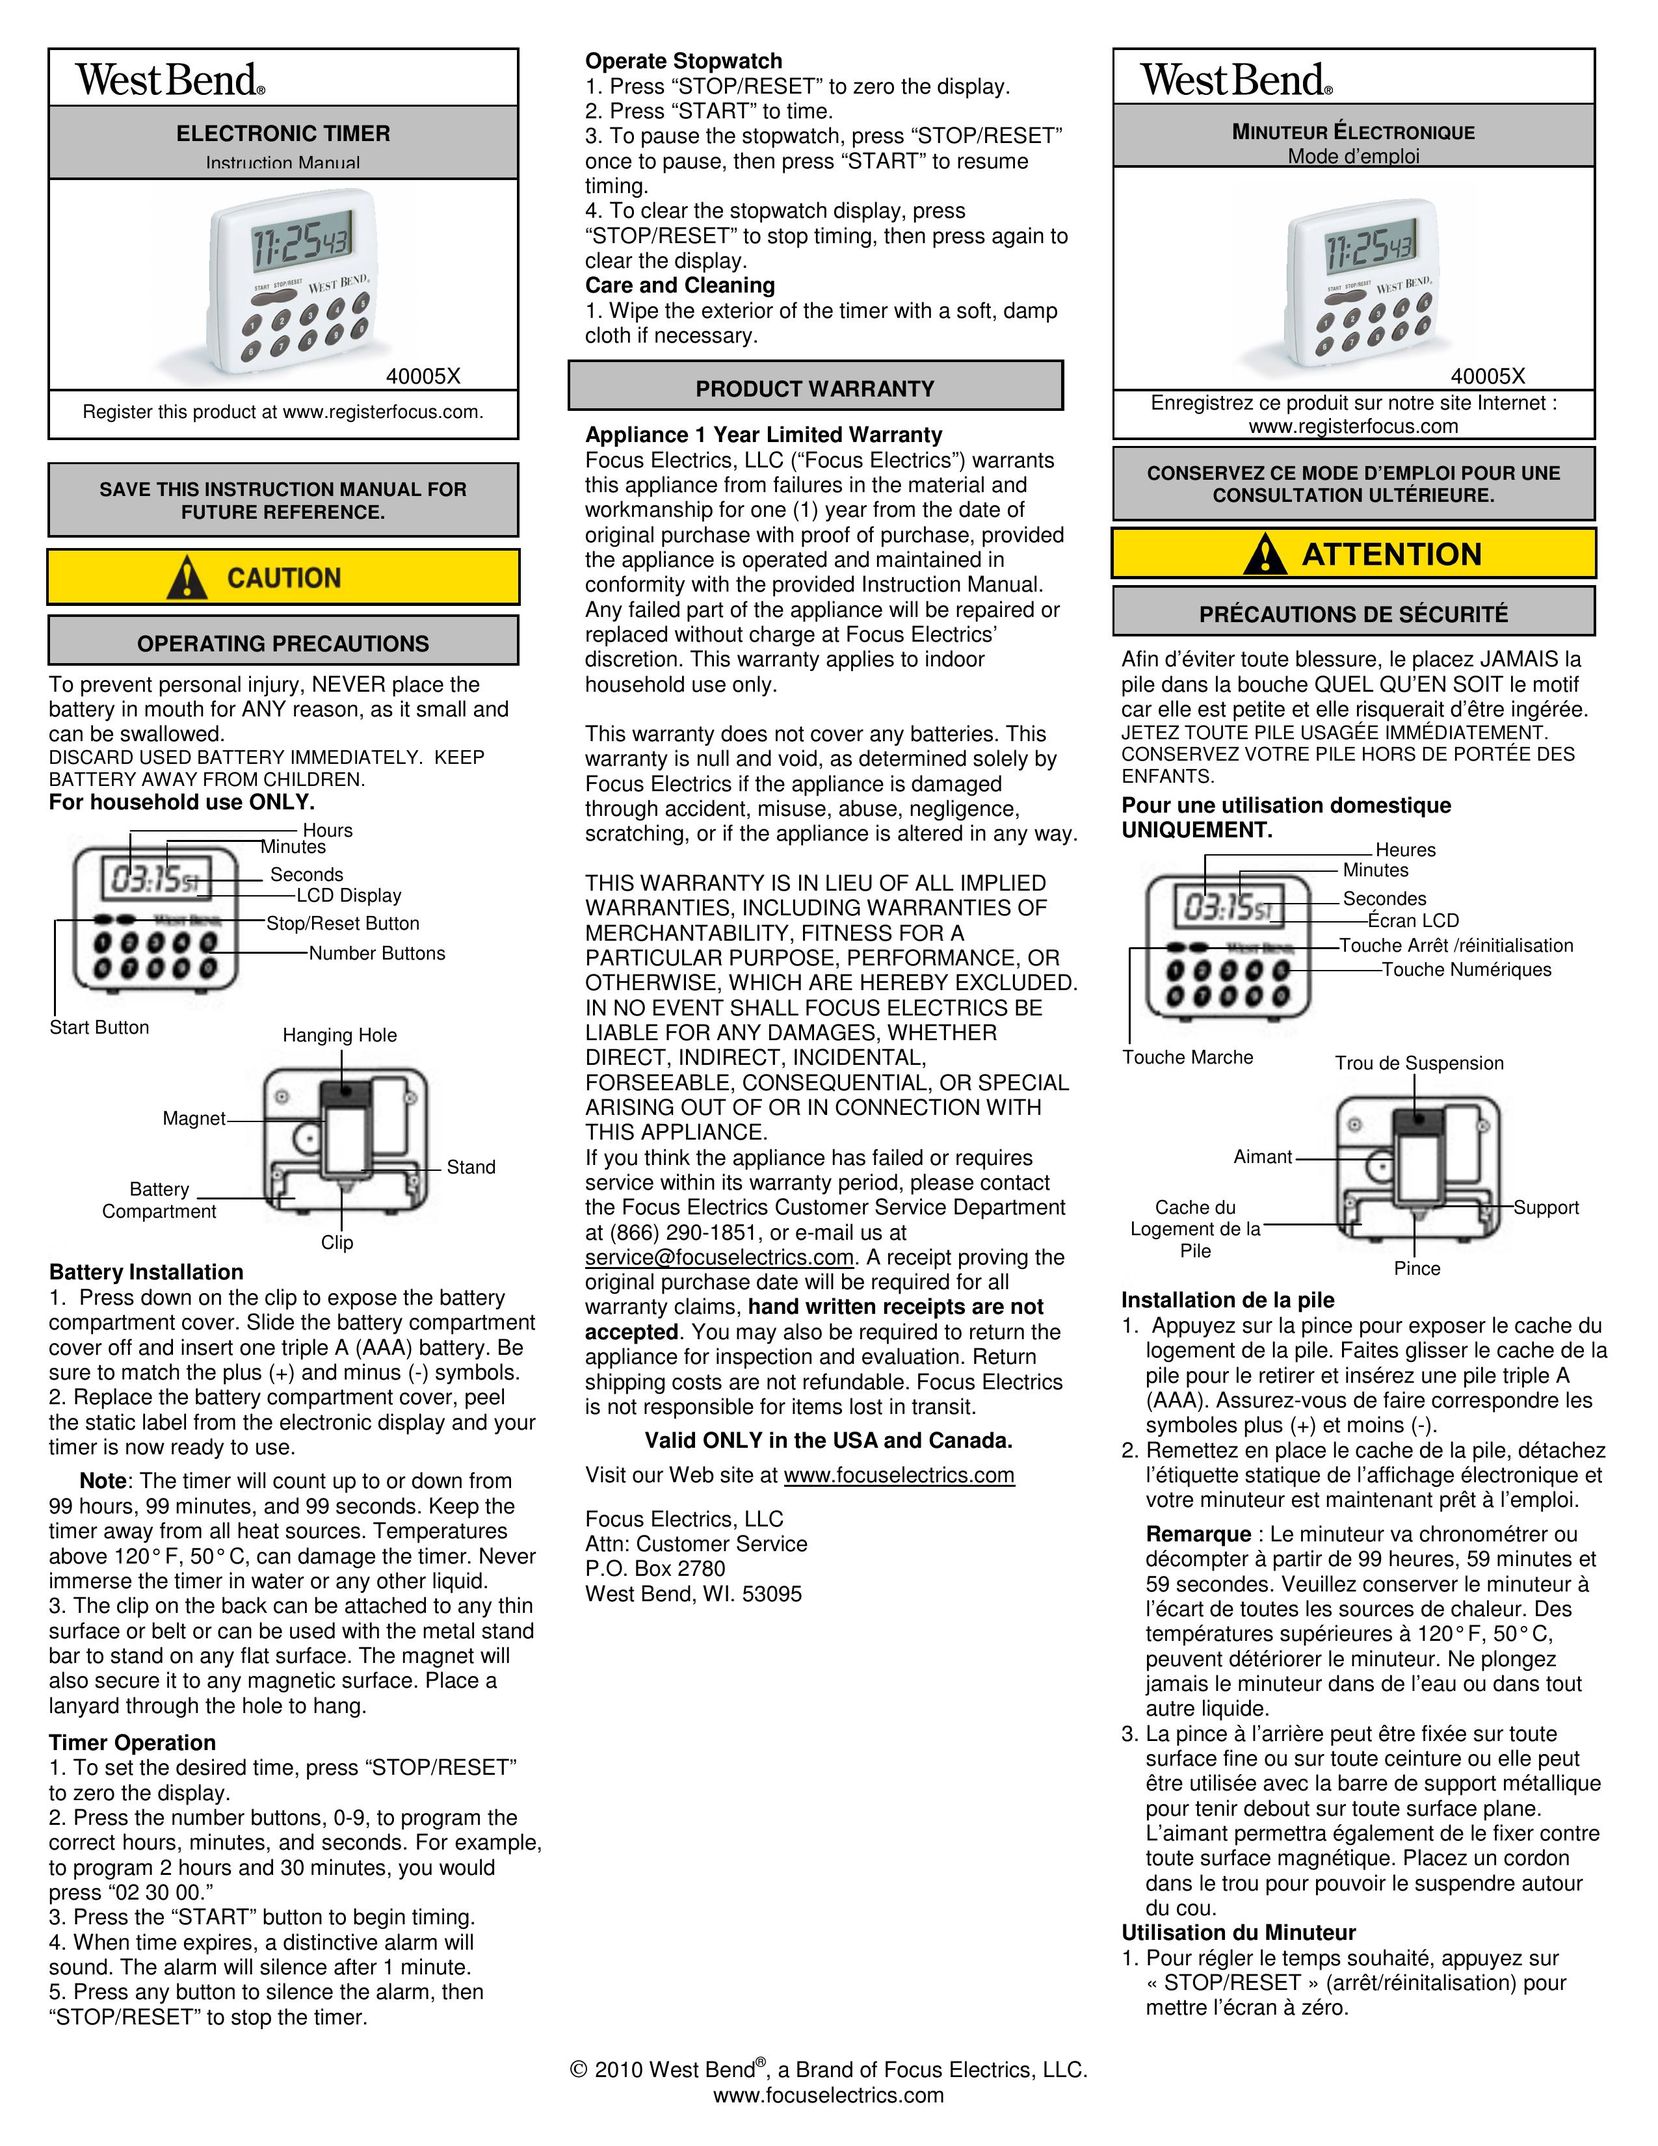 West Bend 40005X Time Clock User Manual